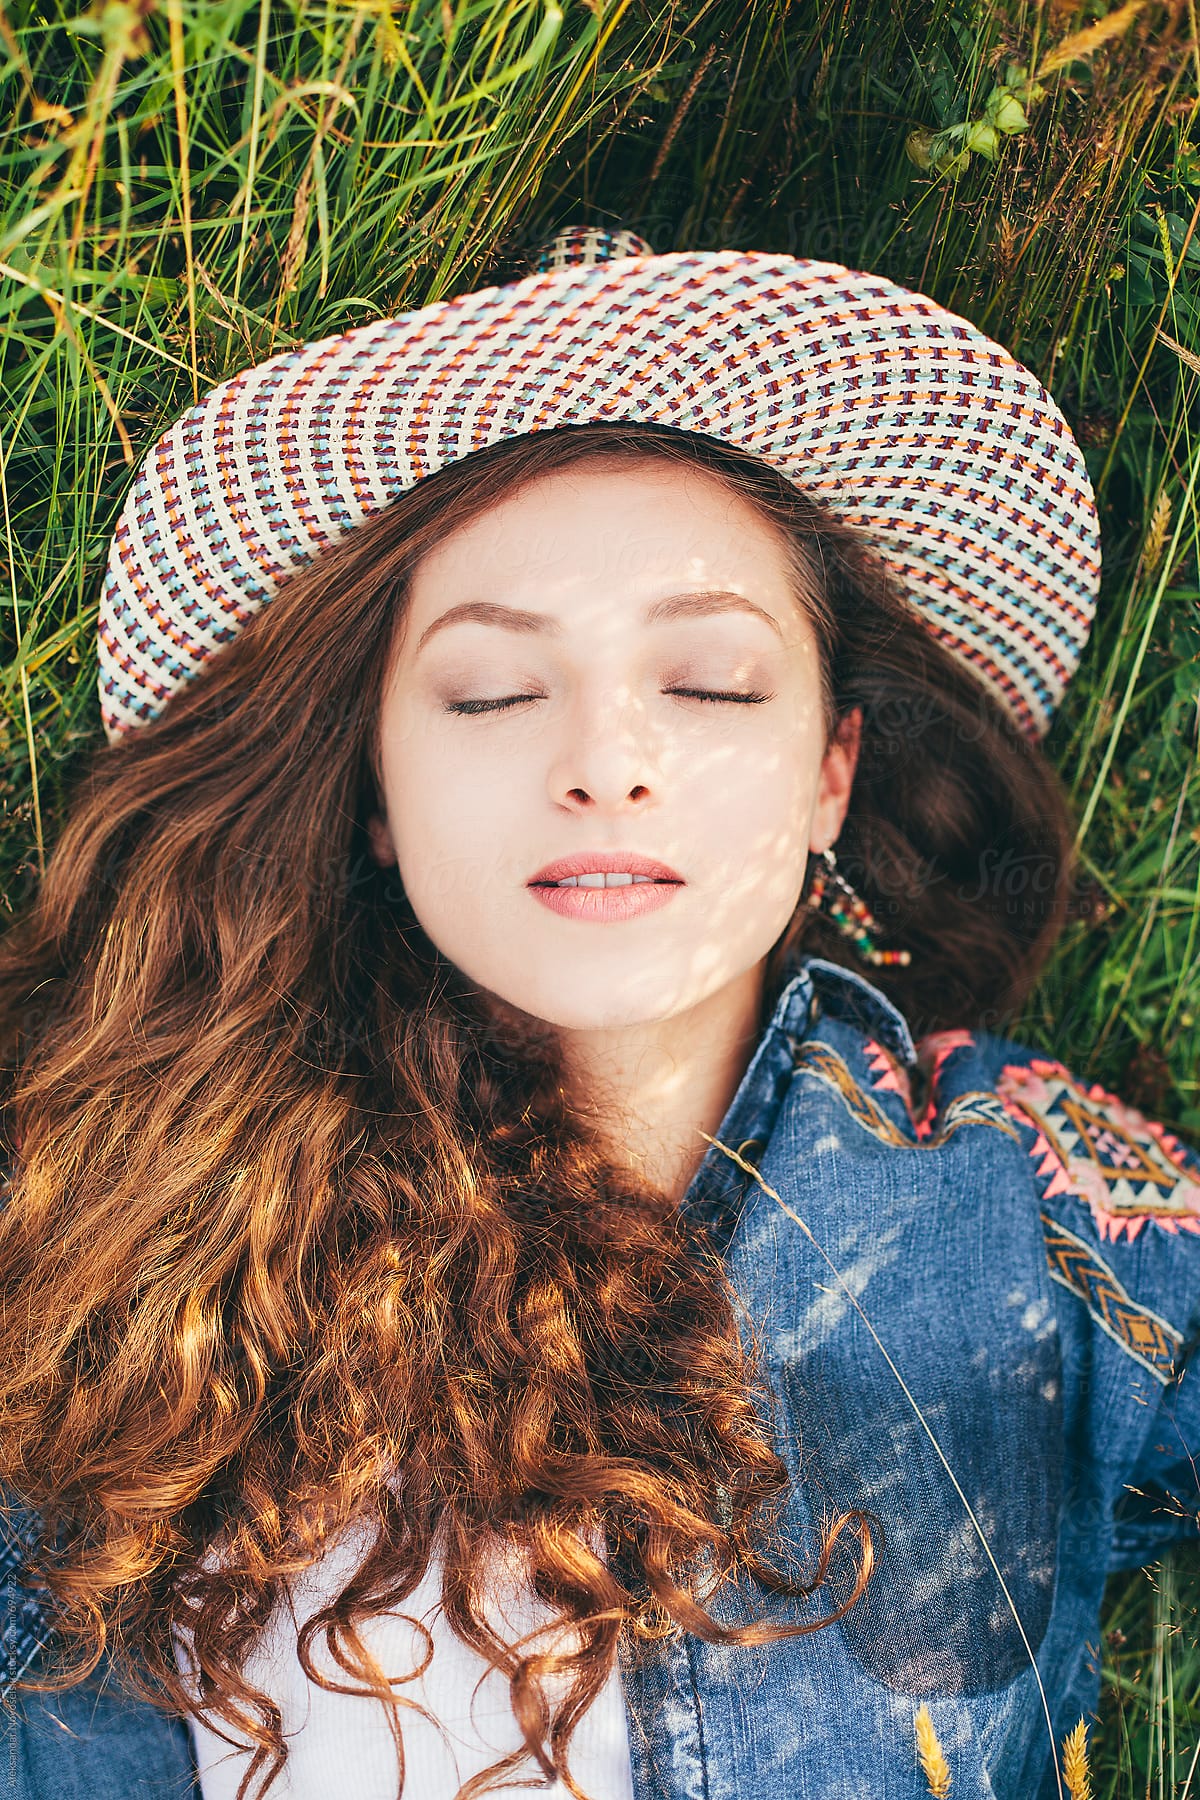 Sensual Portrait Of A Beautiful Woman With Hat Laying On The Grass Del Colaborador De Stocksy